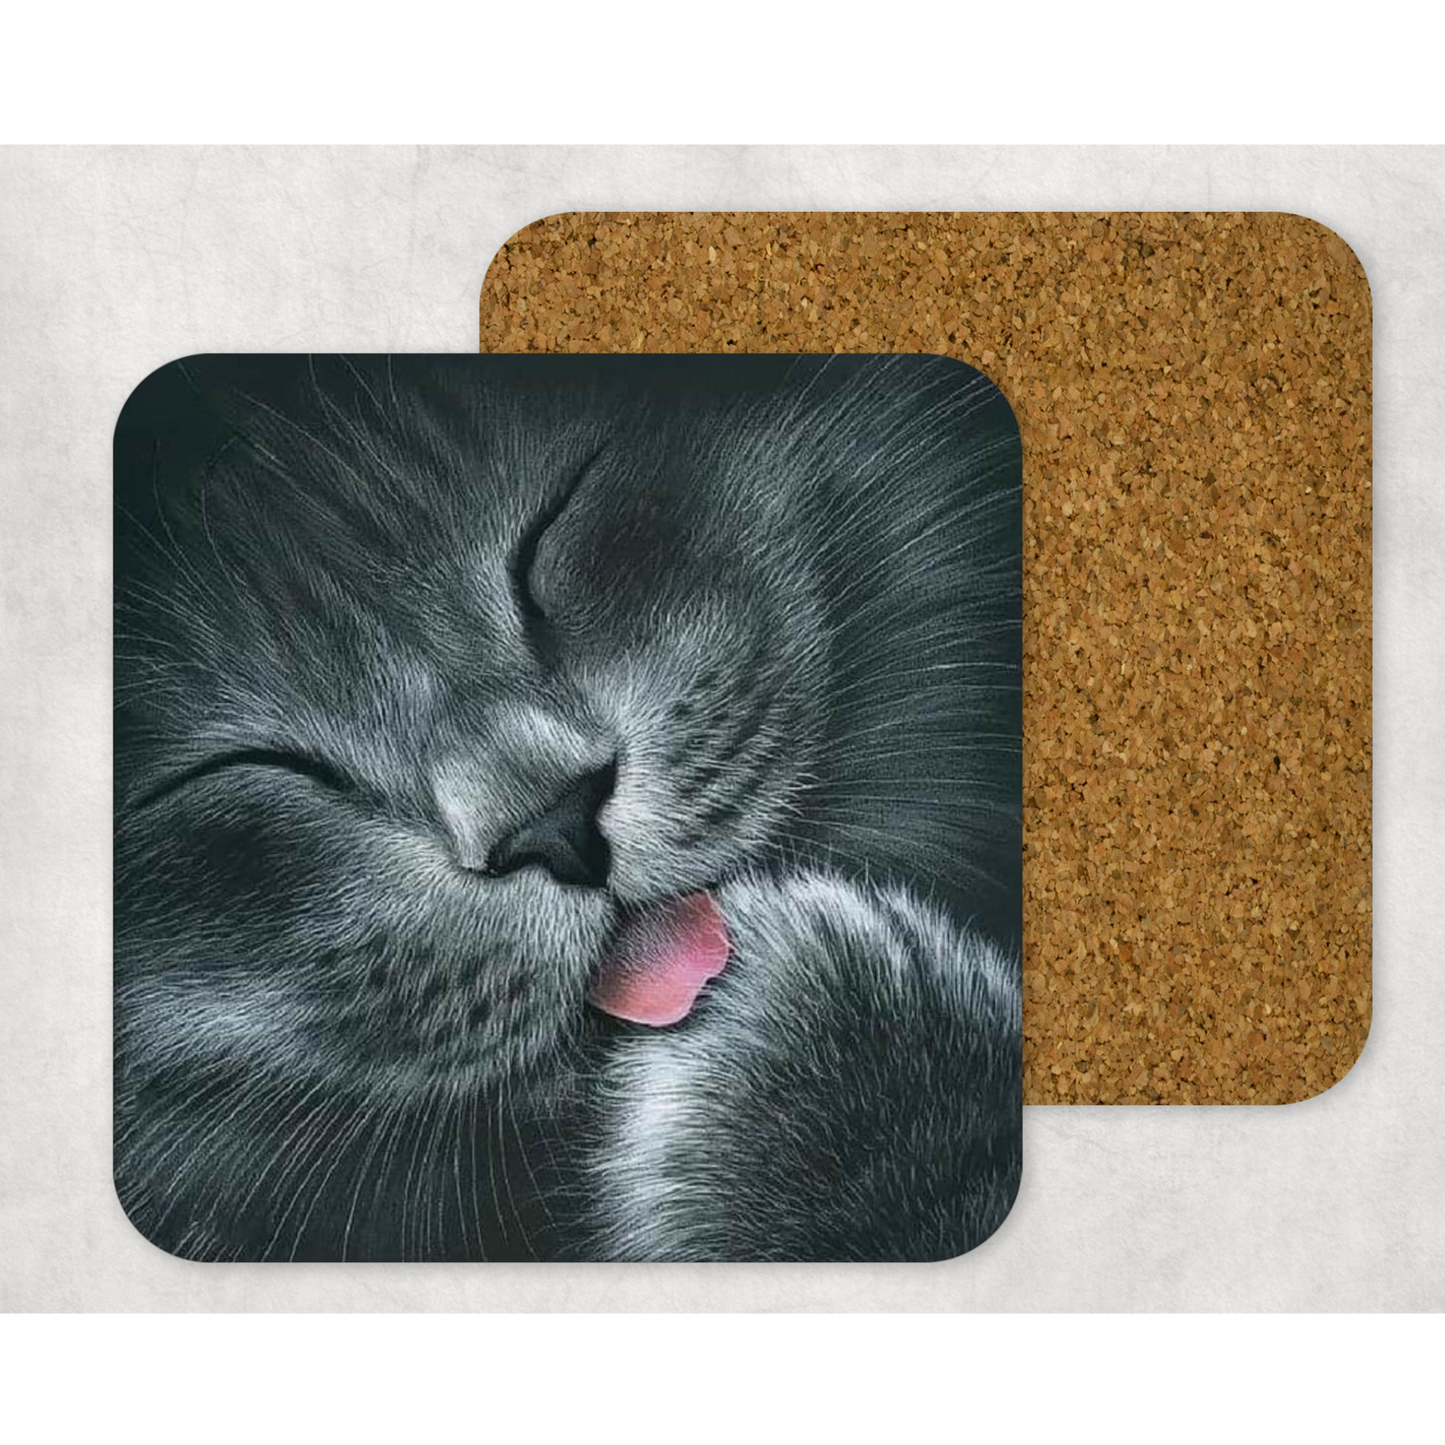 Beautifully Printed Black Cat wooden Coasters for Stylish Home Décor